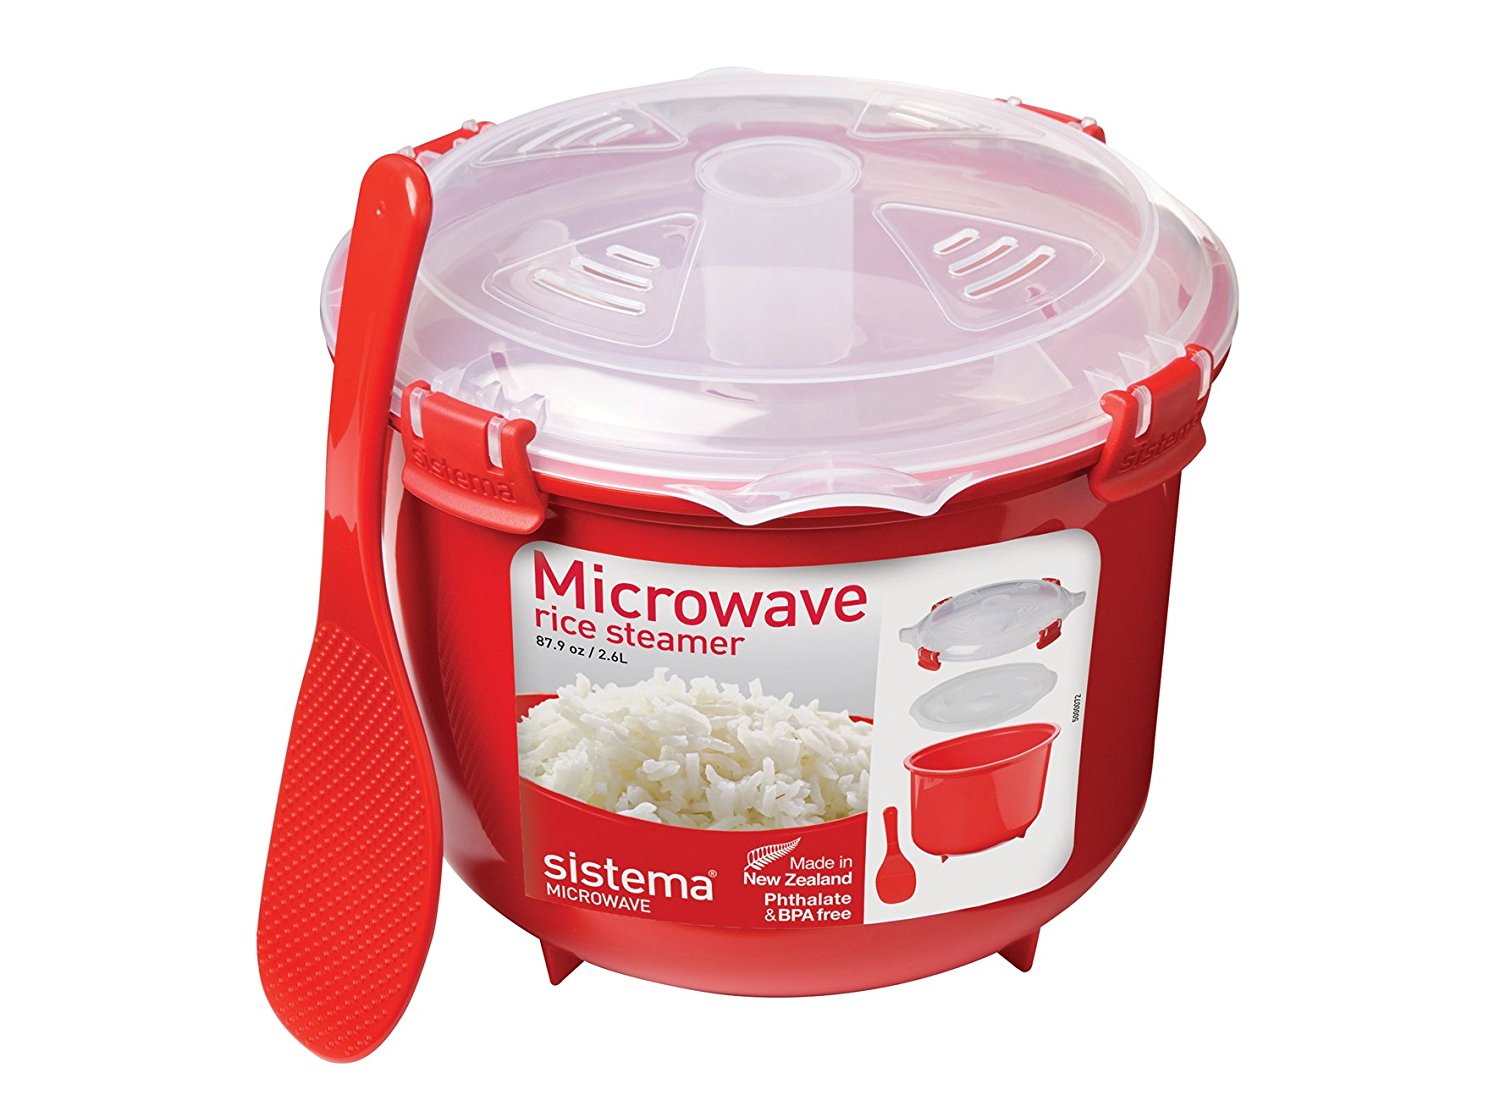 Microwave Rice Cooker - Cooking Rice has Never Been Faster - Legit Gifts